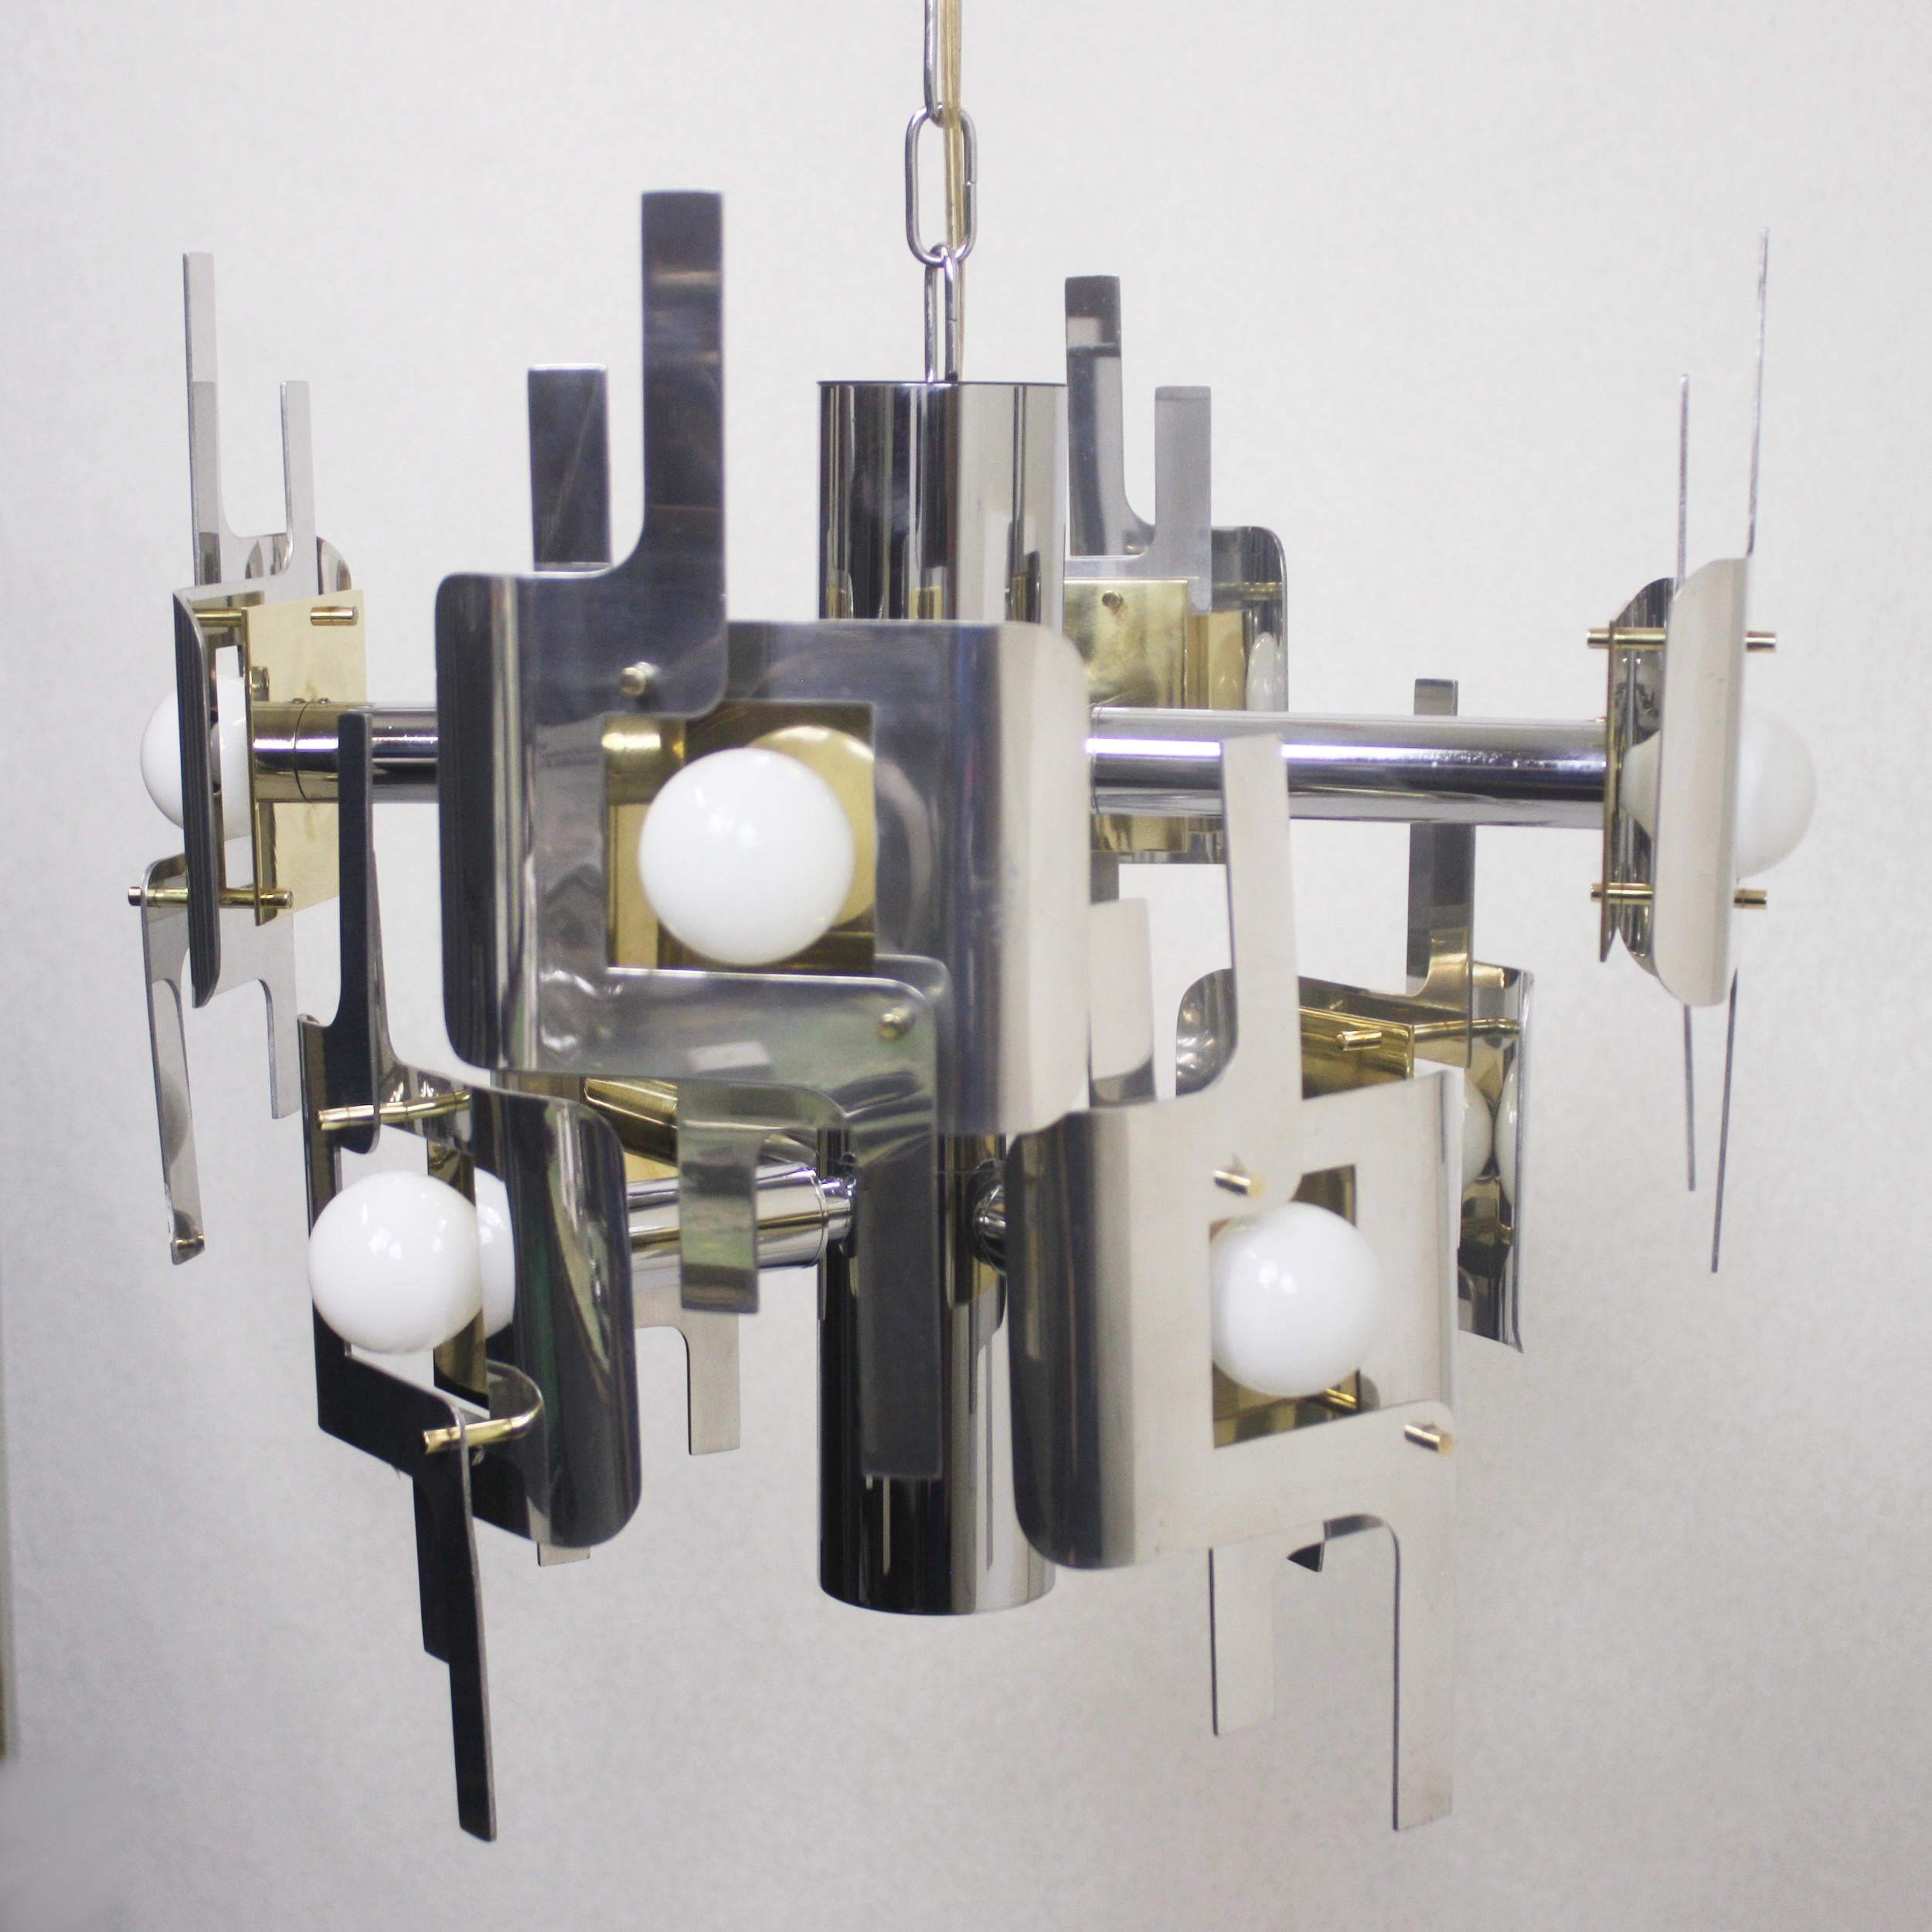 Gorgeous sculptured chandelier designed by Gaetano Sciolari for Lightolier. This is the rare sculpture design crafted like a piece of fine jewelry from over 120 individual, brass, chrome and aluminium pieces! Light fixture has been completely